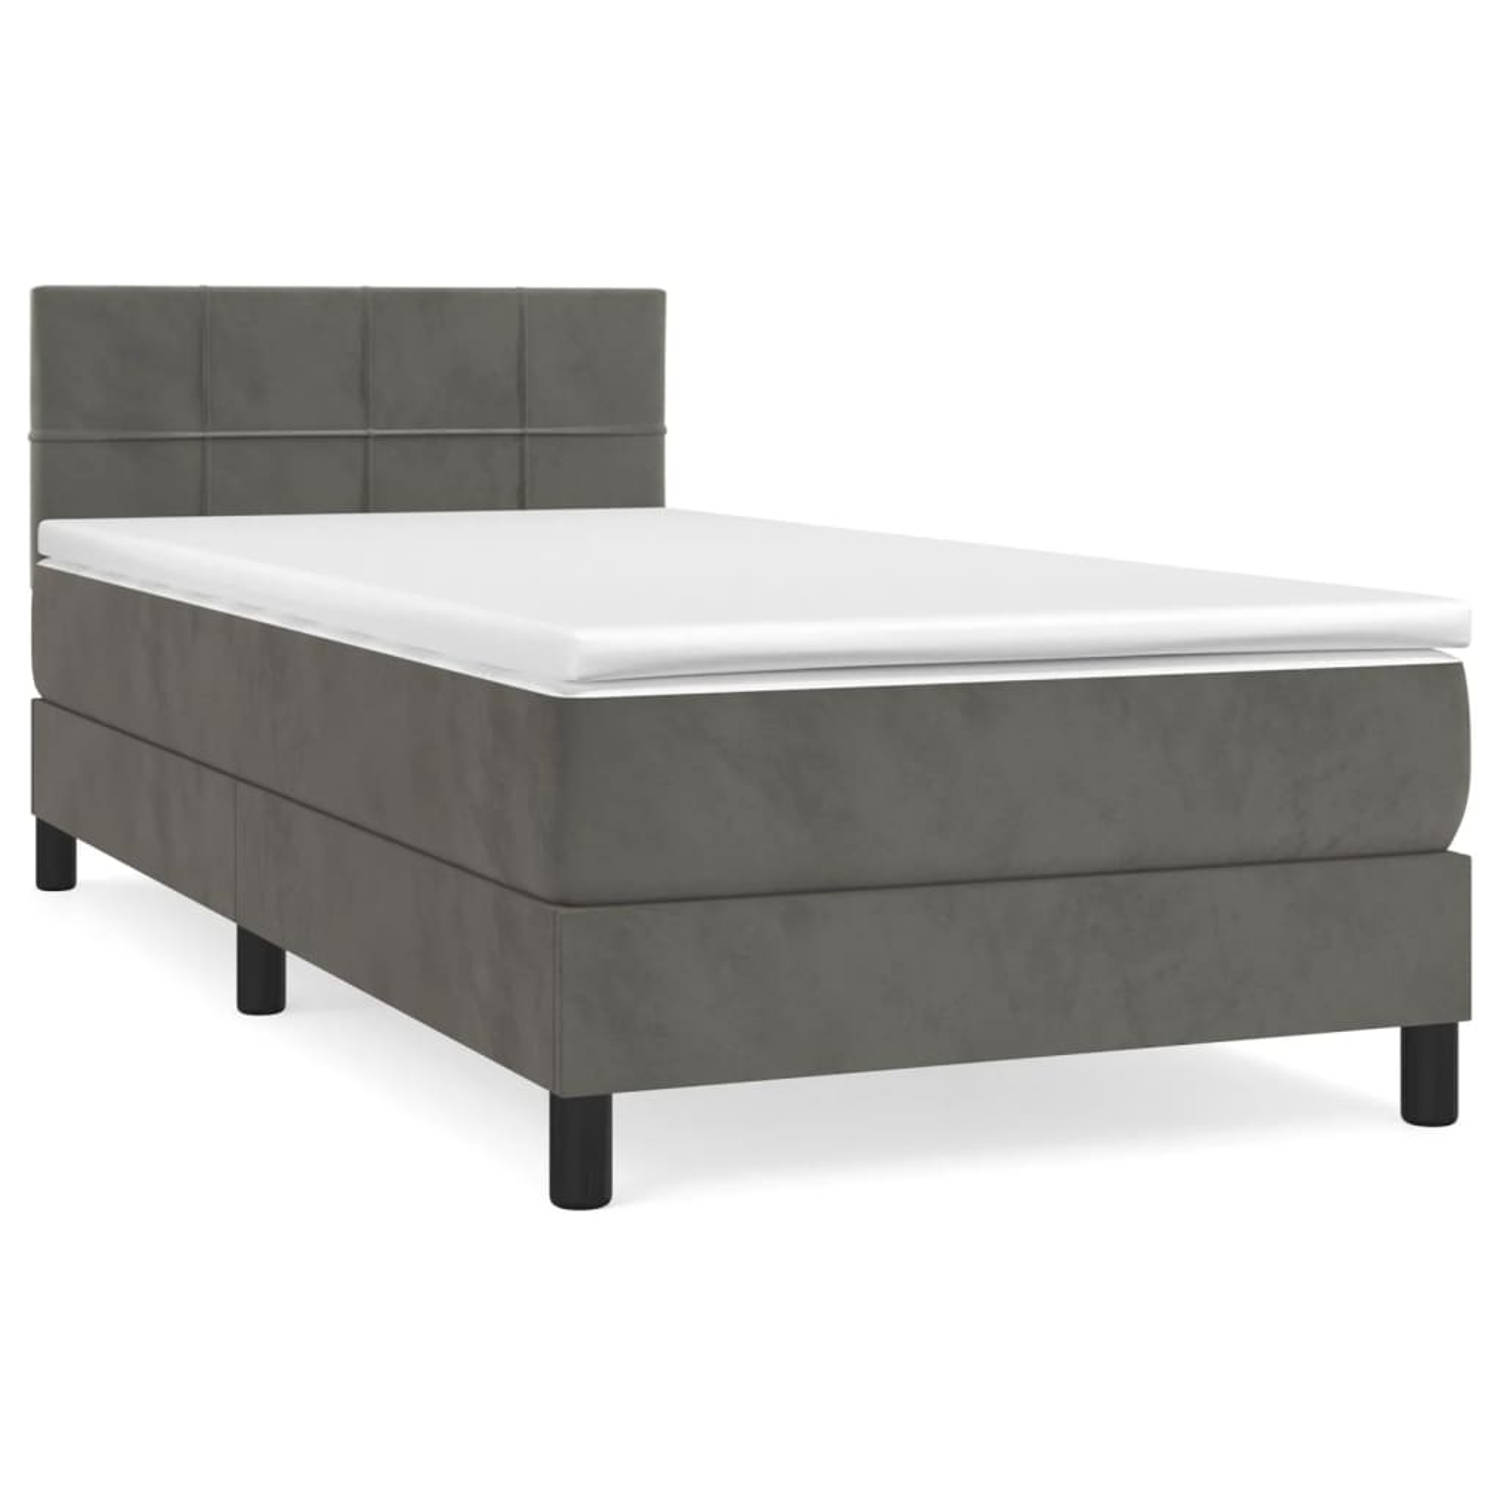 The Living Store Boxspringbed - The Living Store - Bed - 203 x 90 x 78/88 cm - Donkergrijs